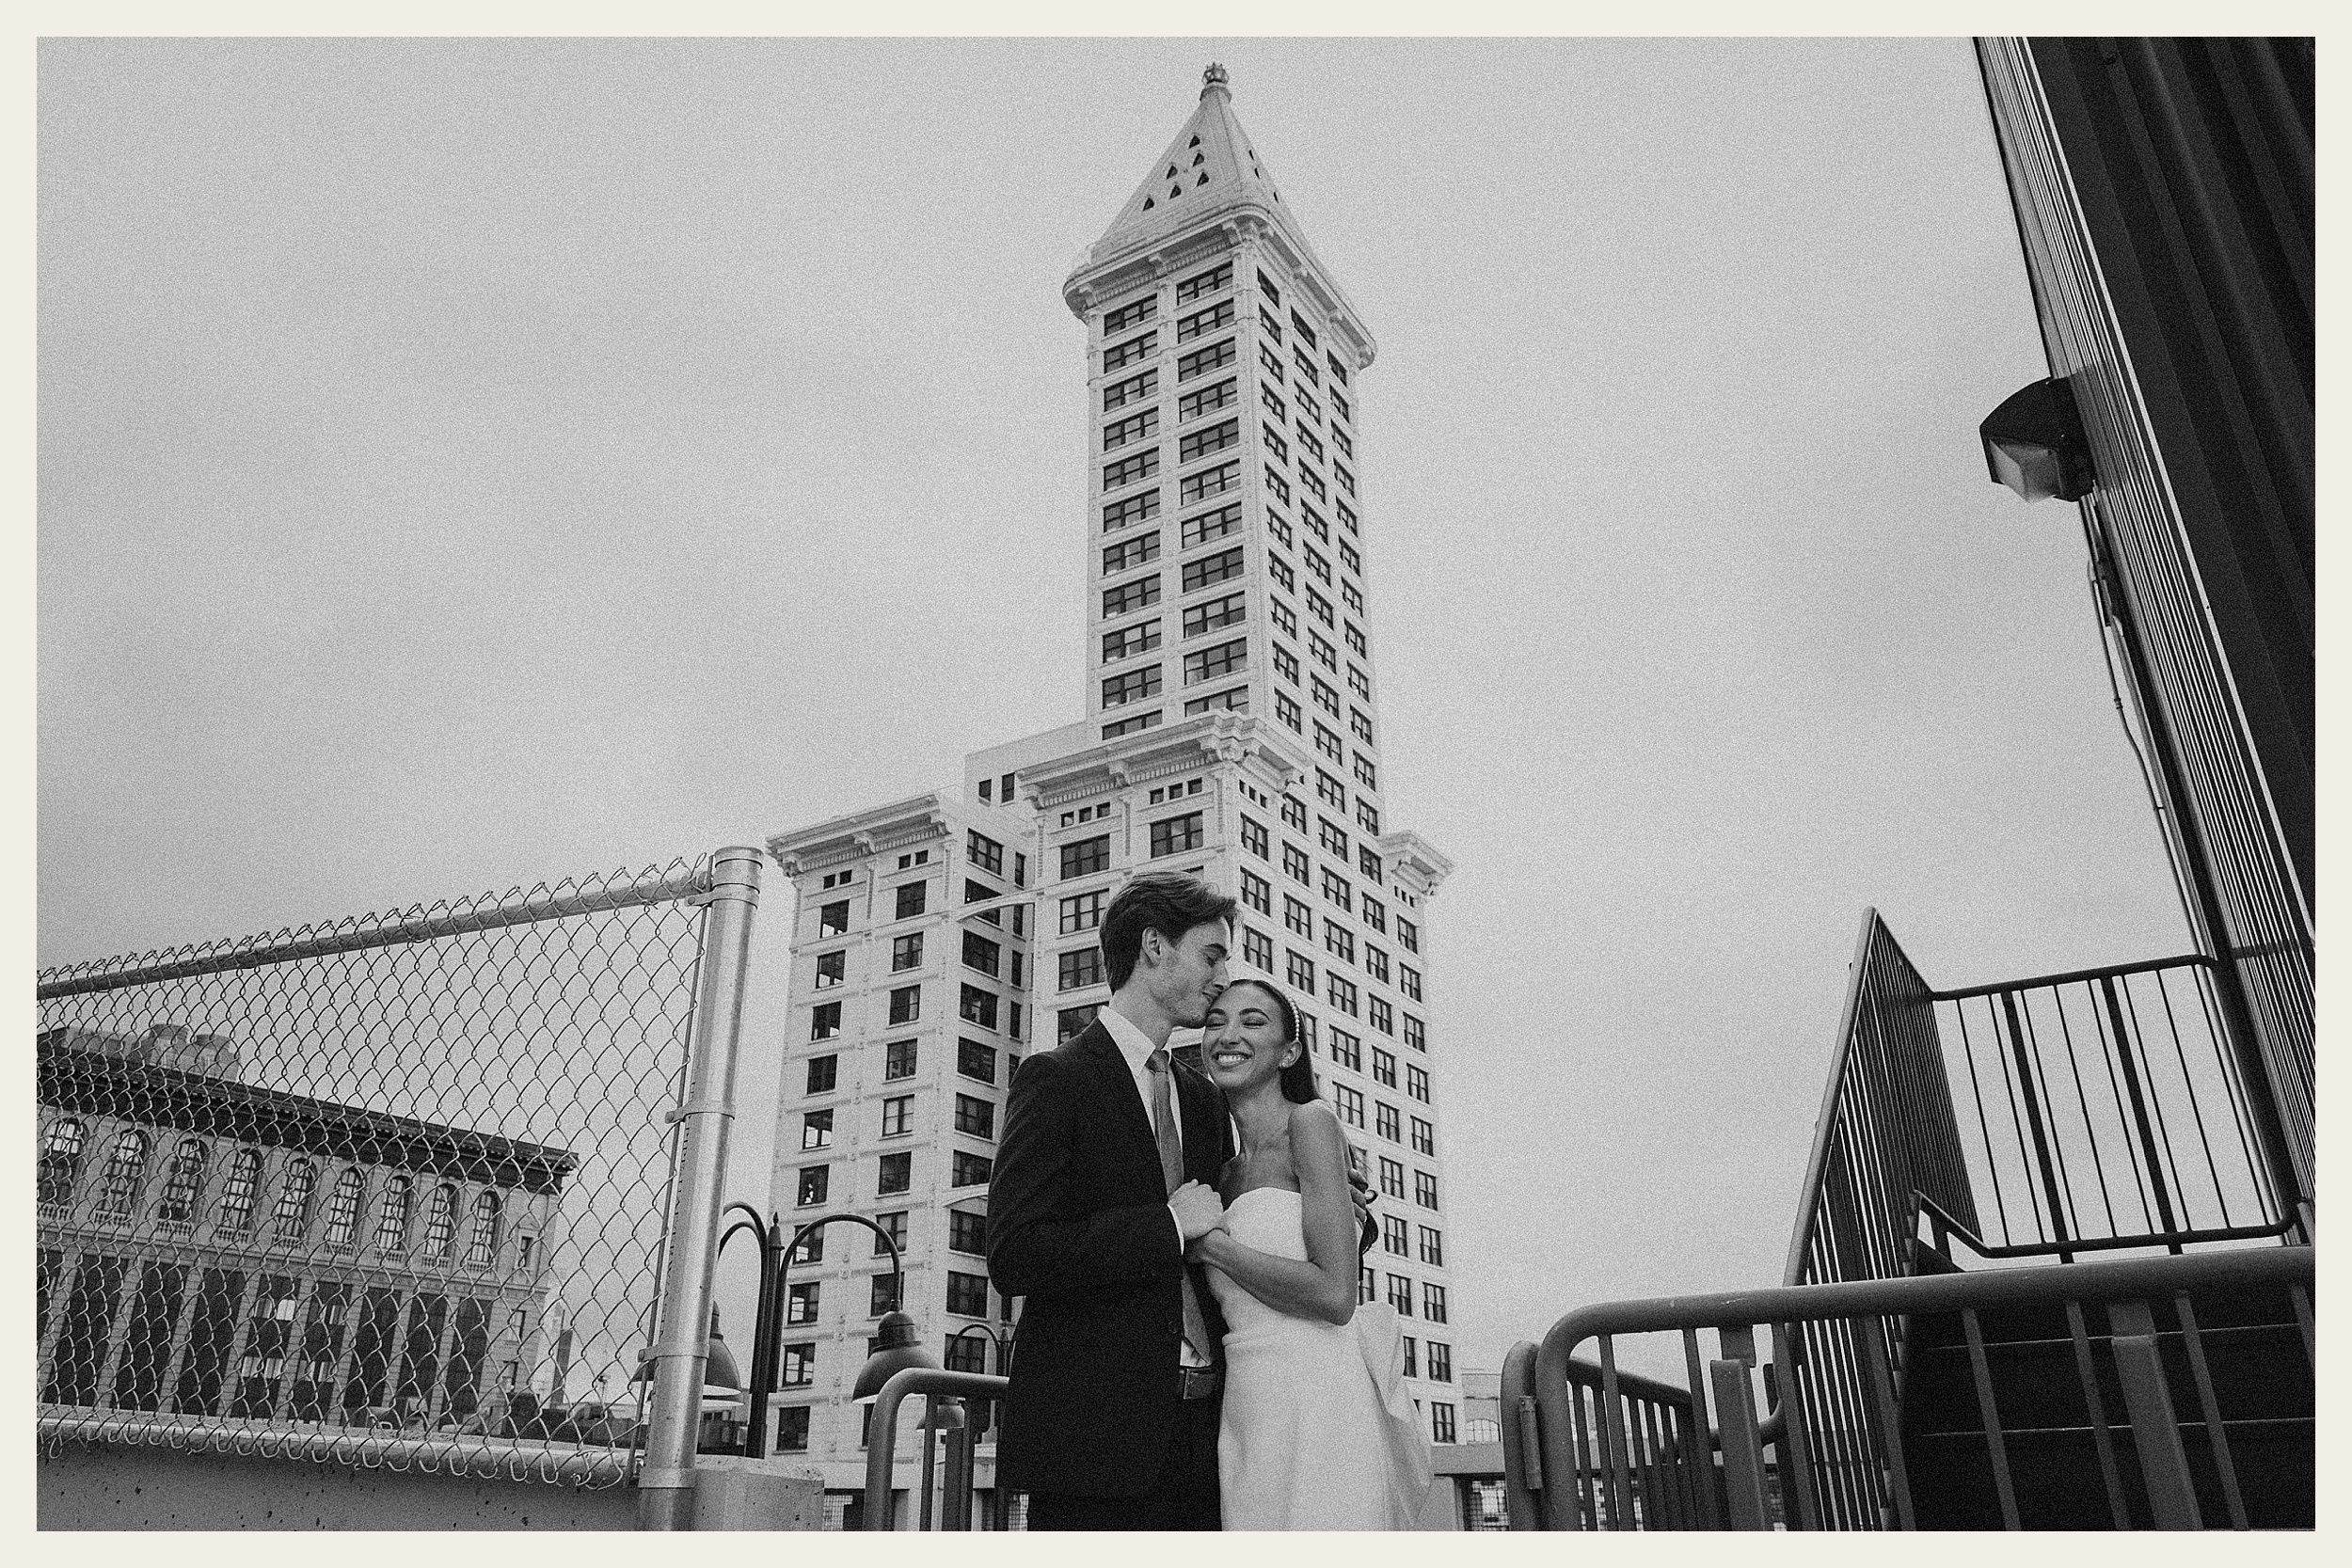 bride and groom holding each other
downtown seattle